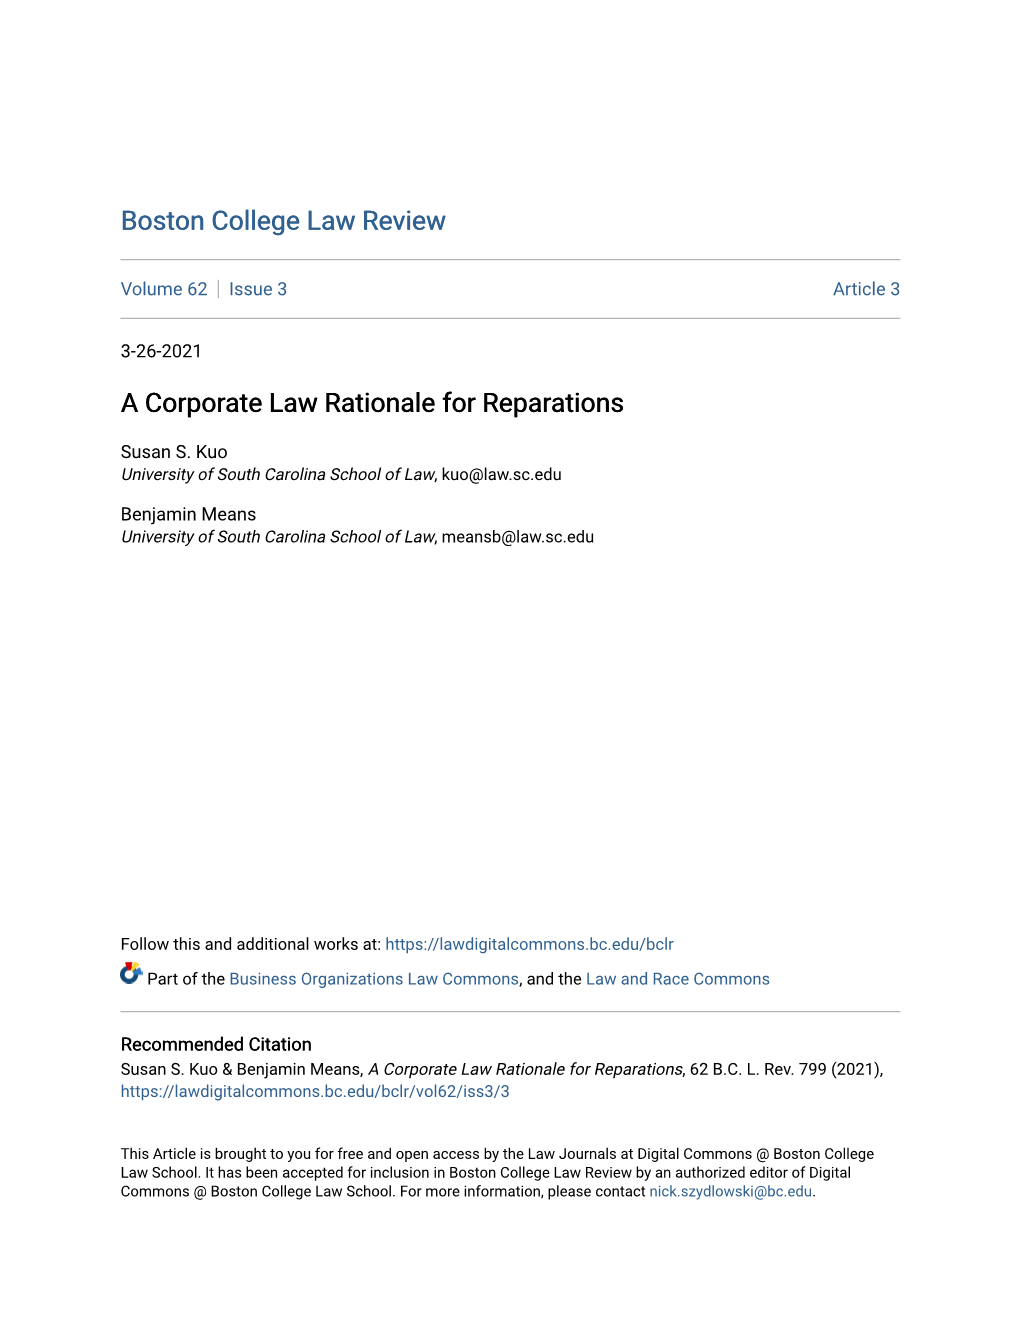 A Corporate Law Rationale for Reparations